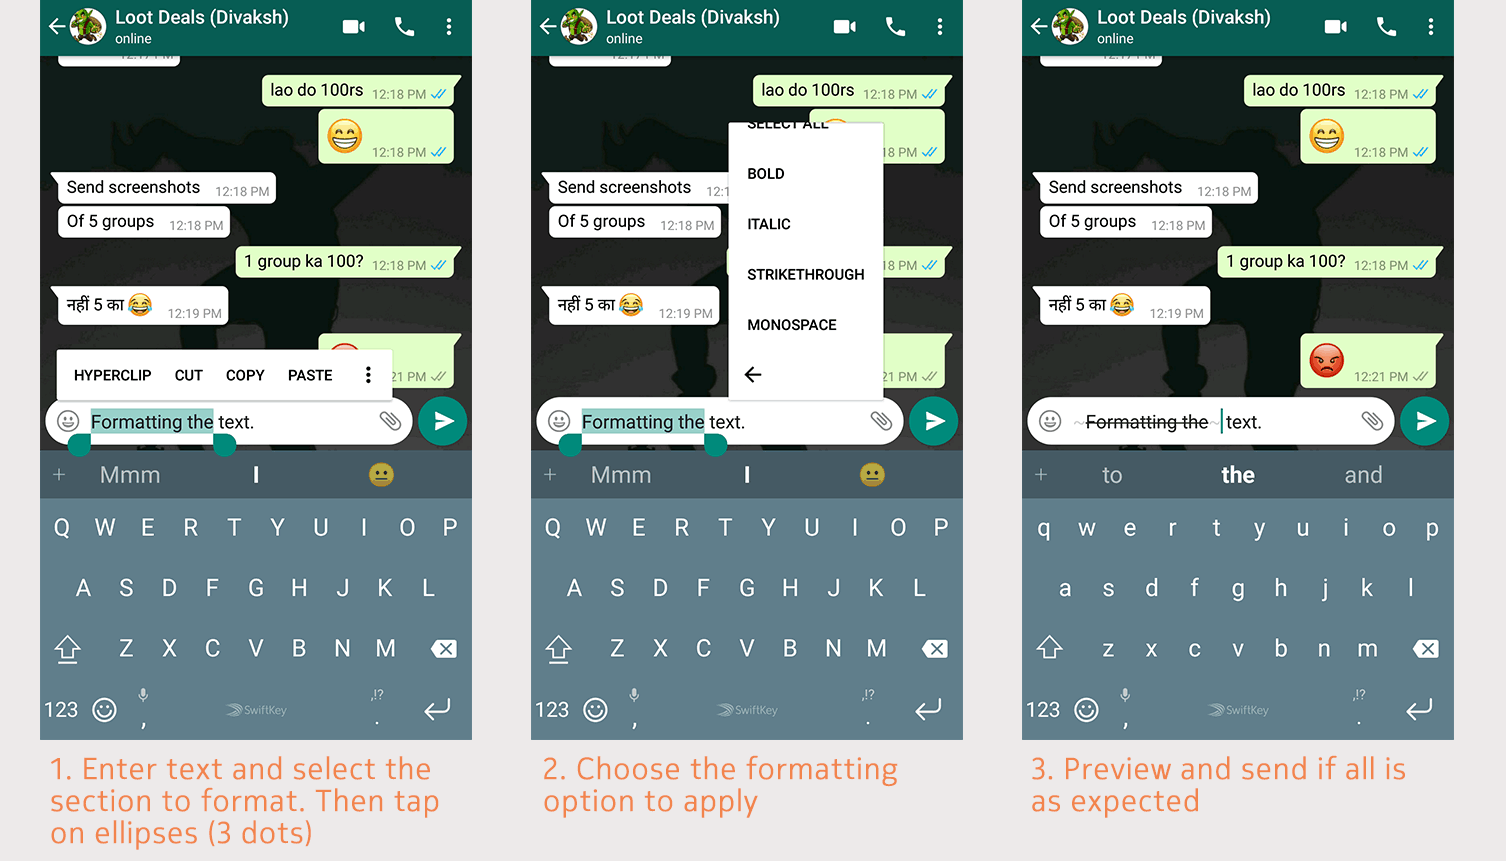 Format messages as bold, italics, monospace and strikethrough on WhatsApp